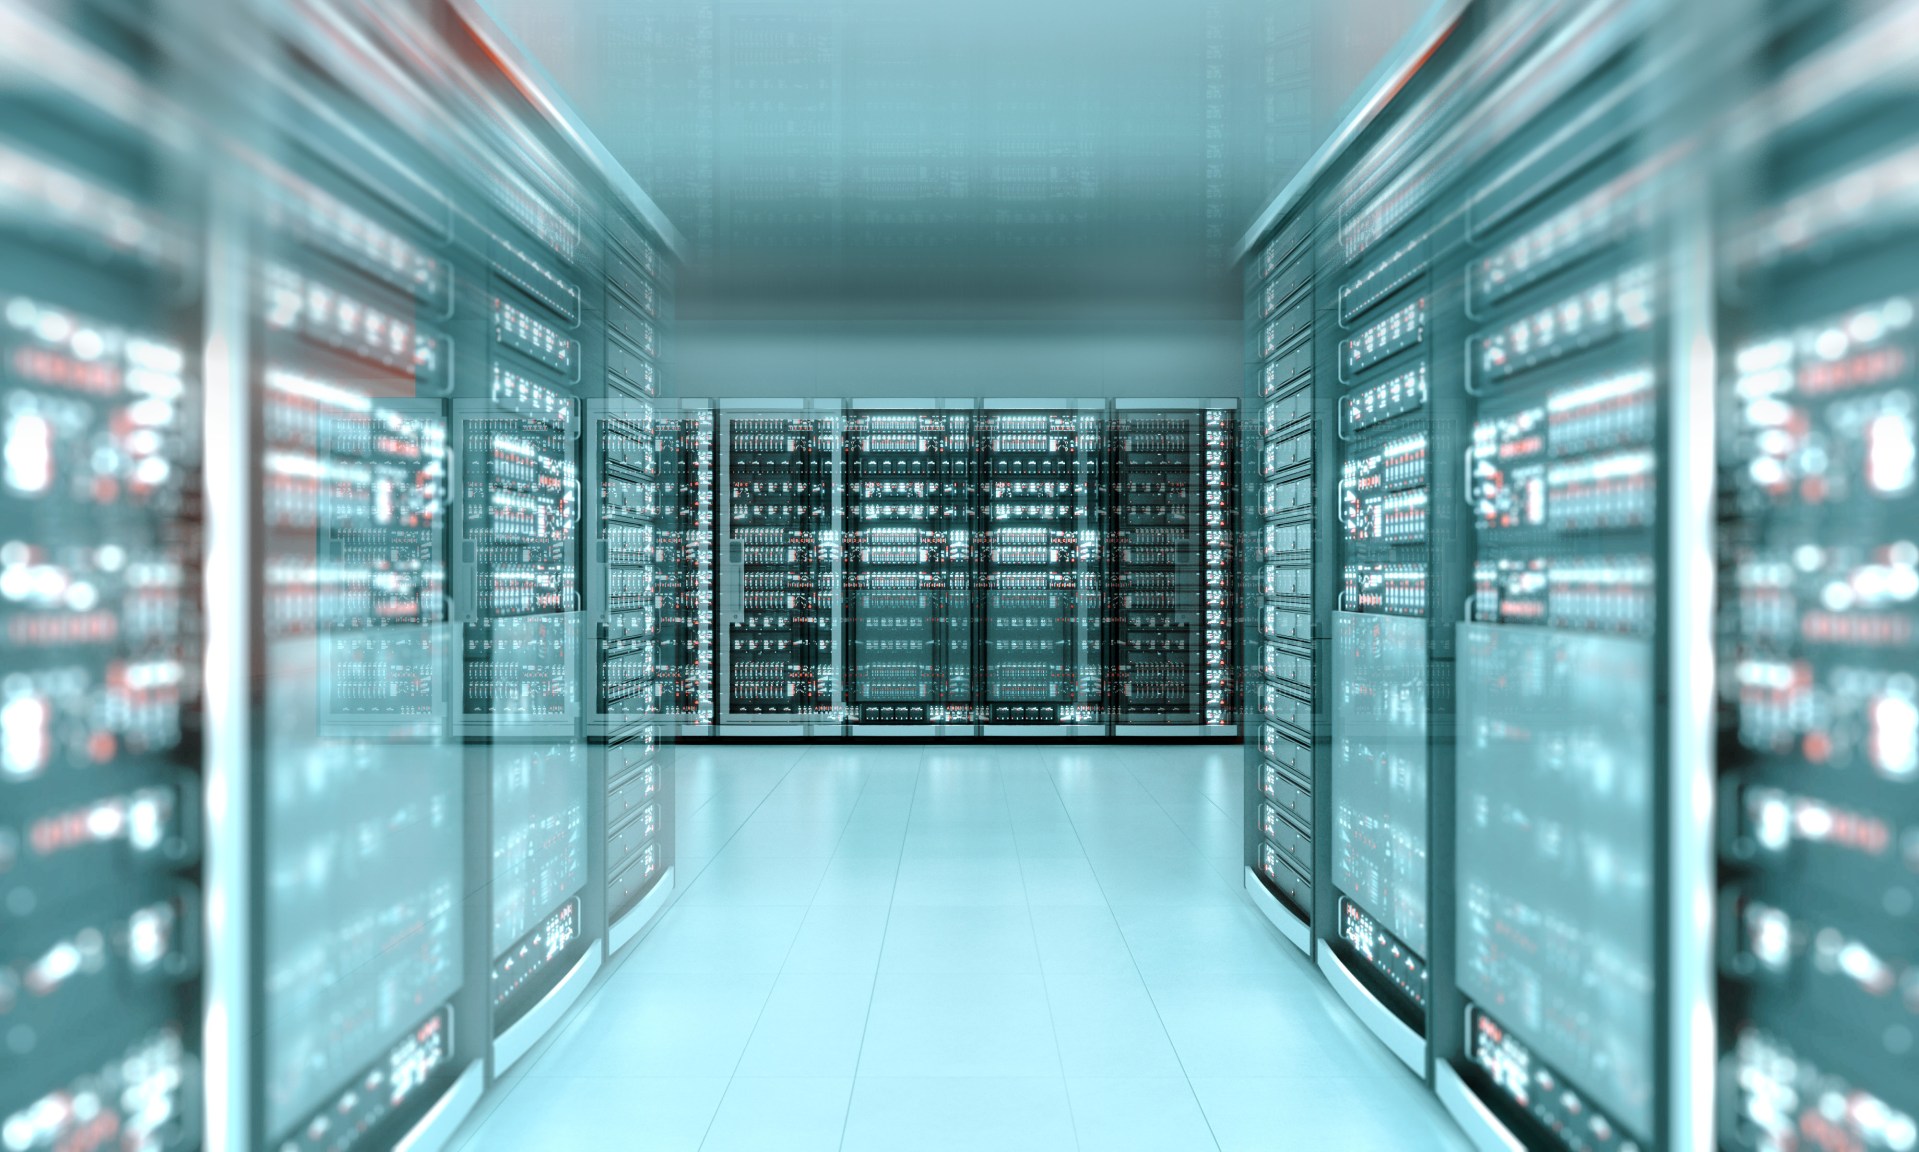 Understanding Infrastructure as a Service (IaaS) In Data Centers